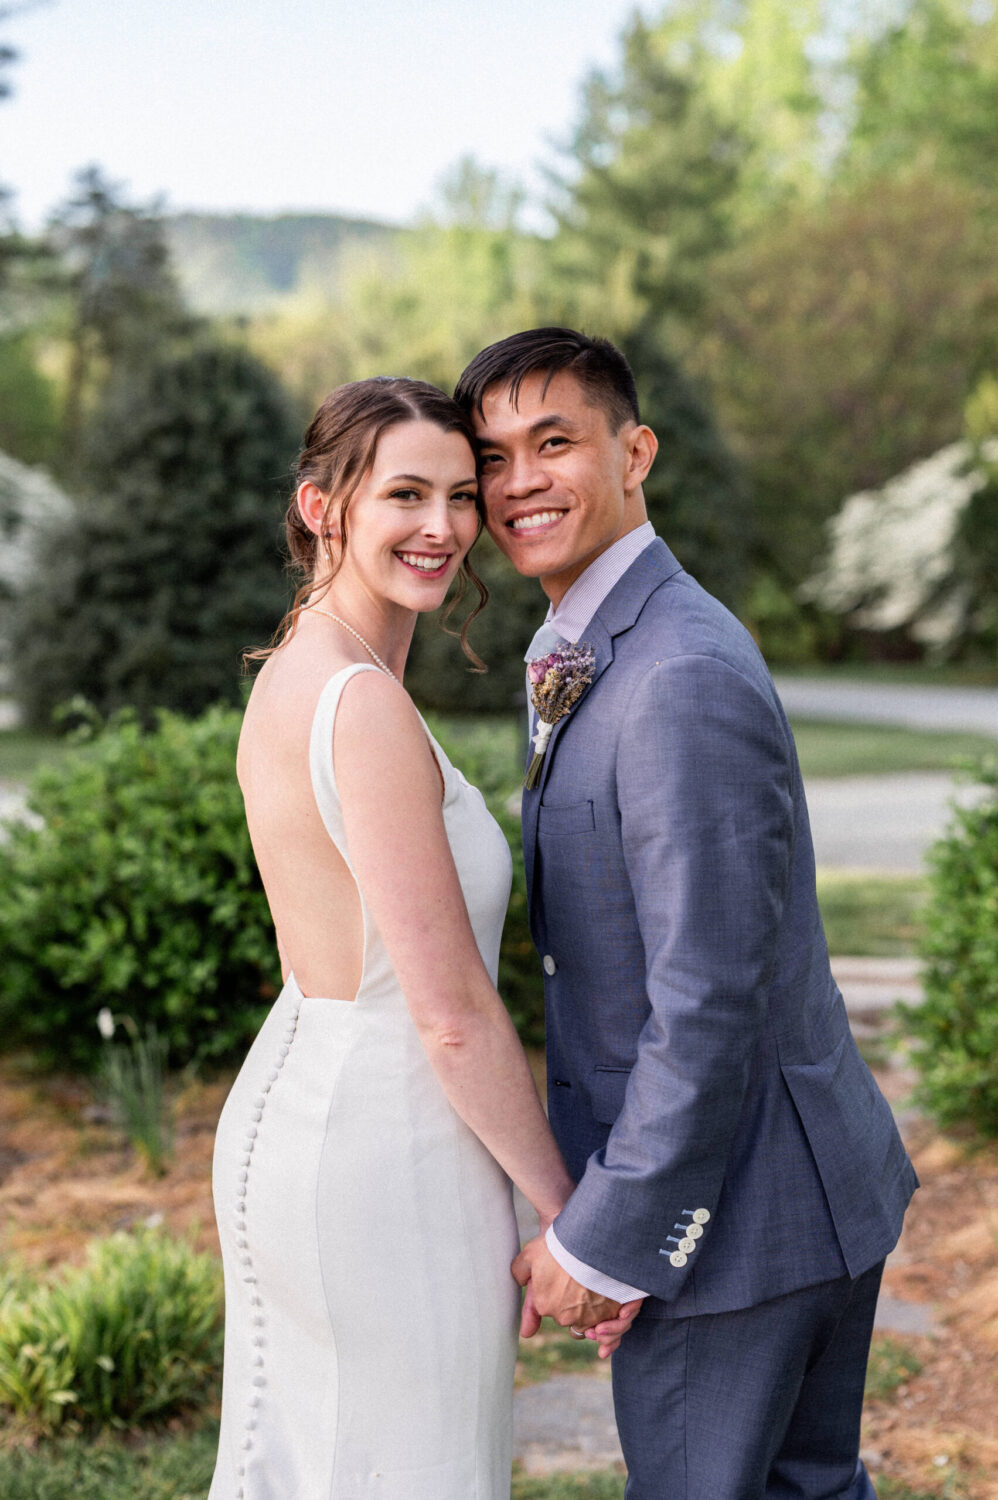 Intimate Micro Wedding at the Clifton Inn in Charlottesville, VA - Hunter and Sarah Photography